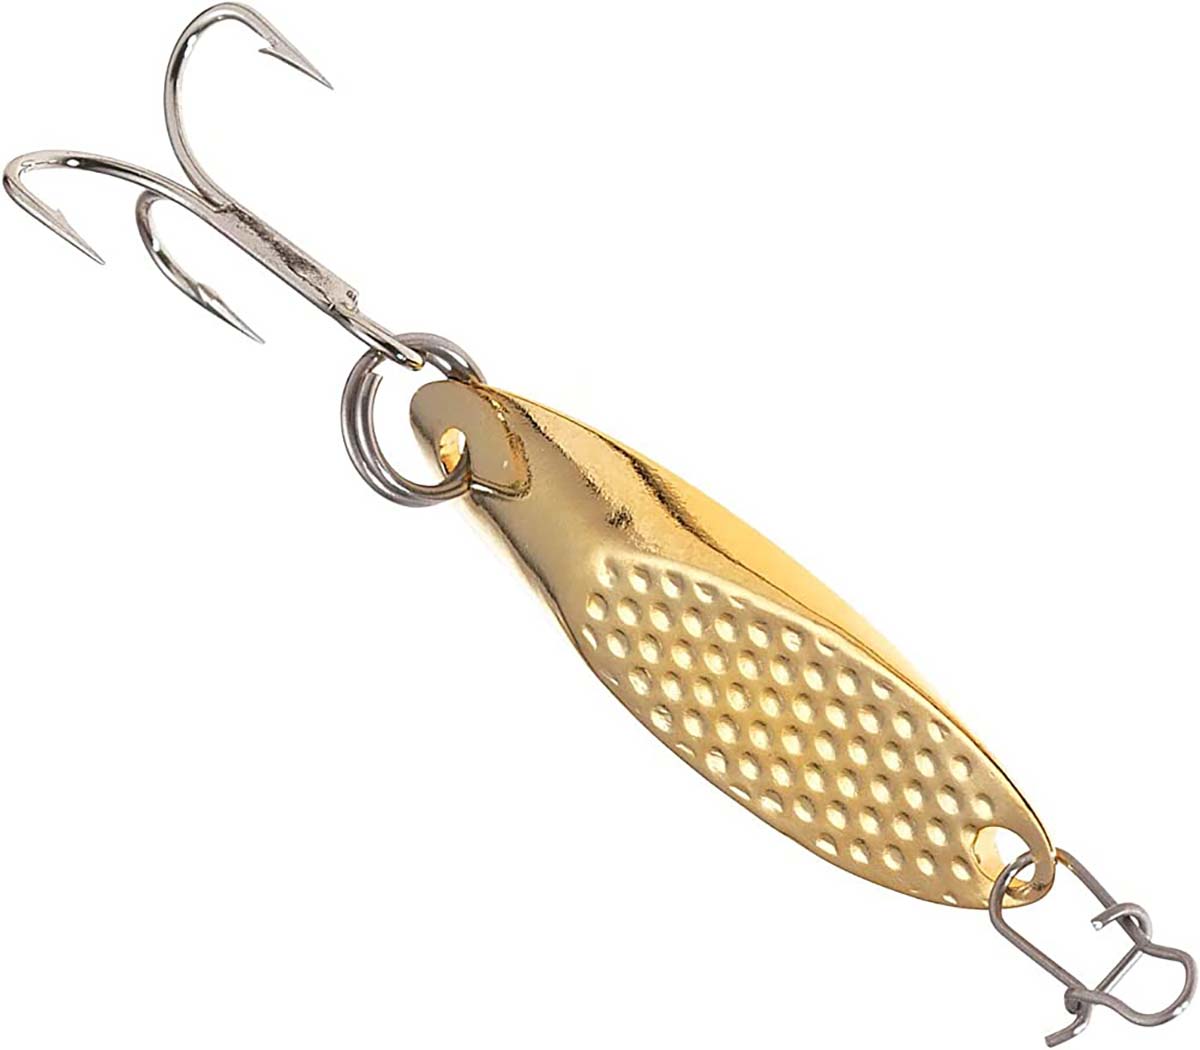 Here are my dozen must-have lures and baits for first day of trout fishing  season. What are yours? 